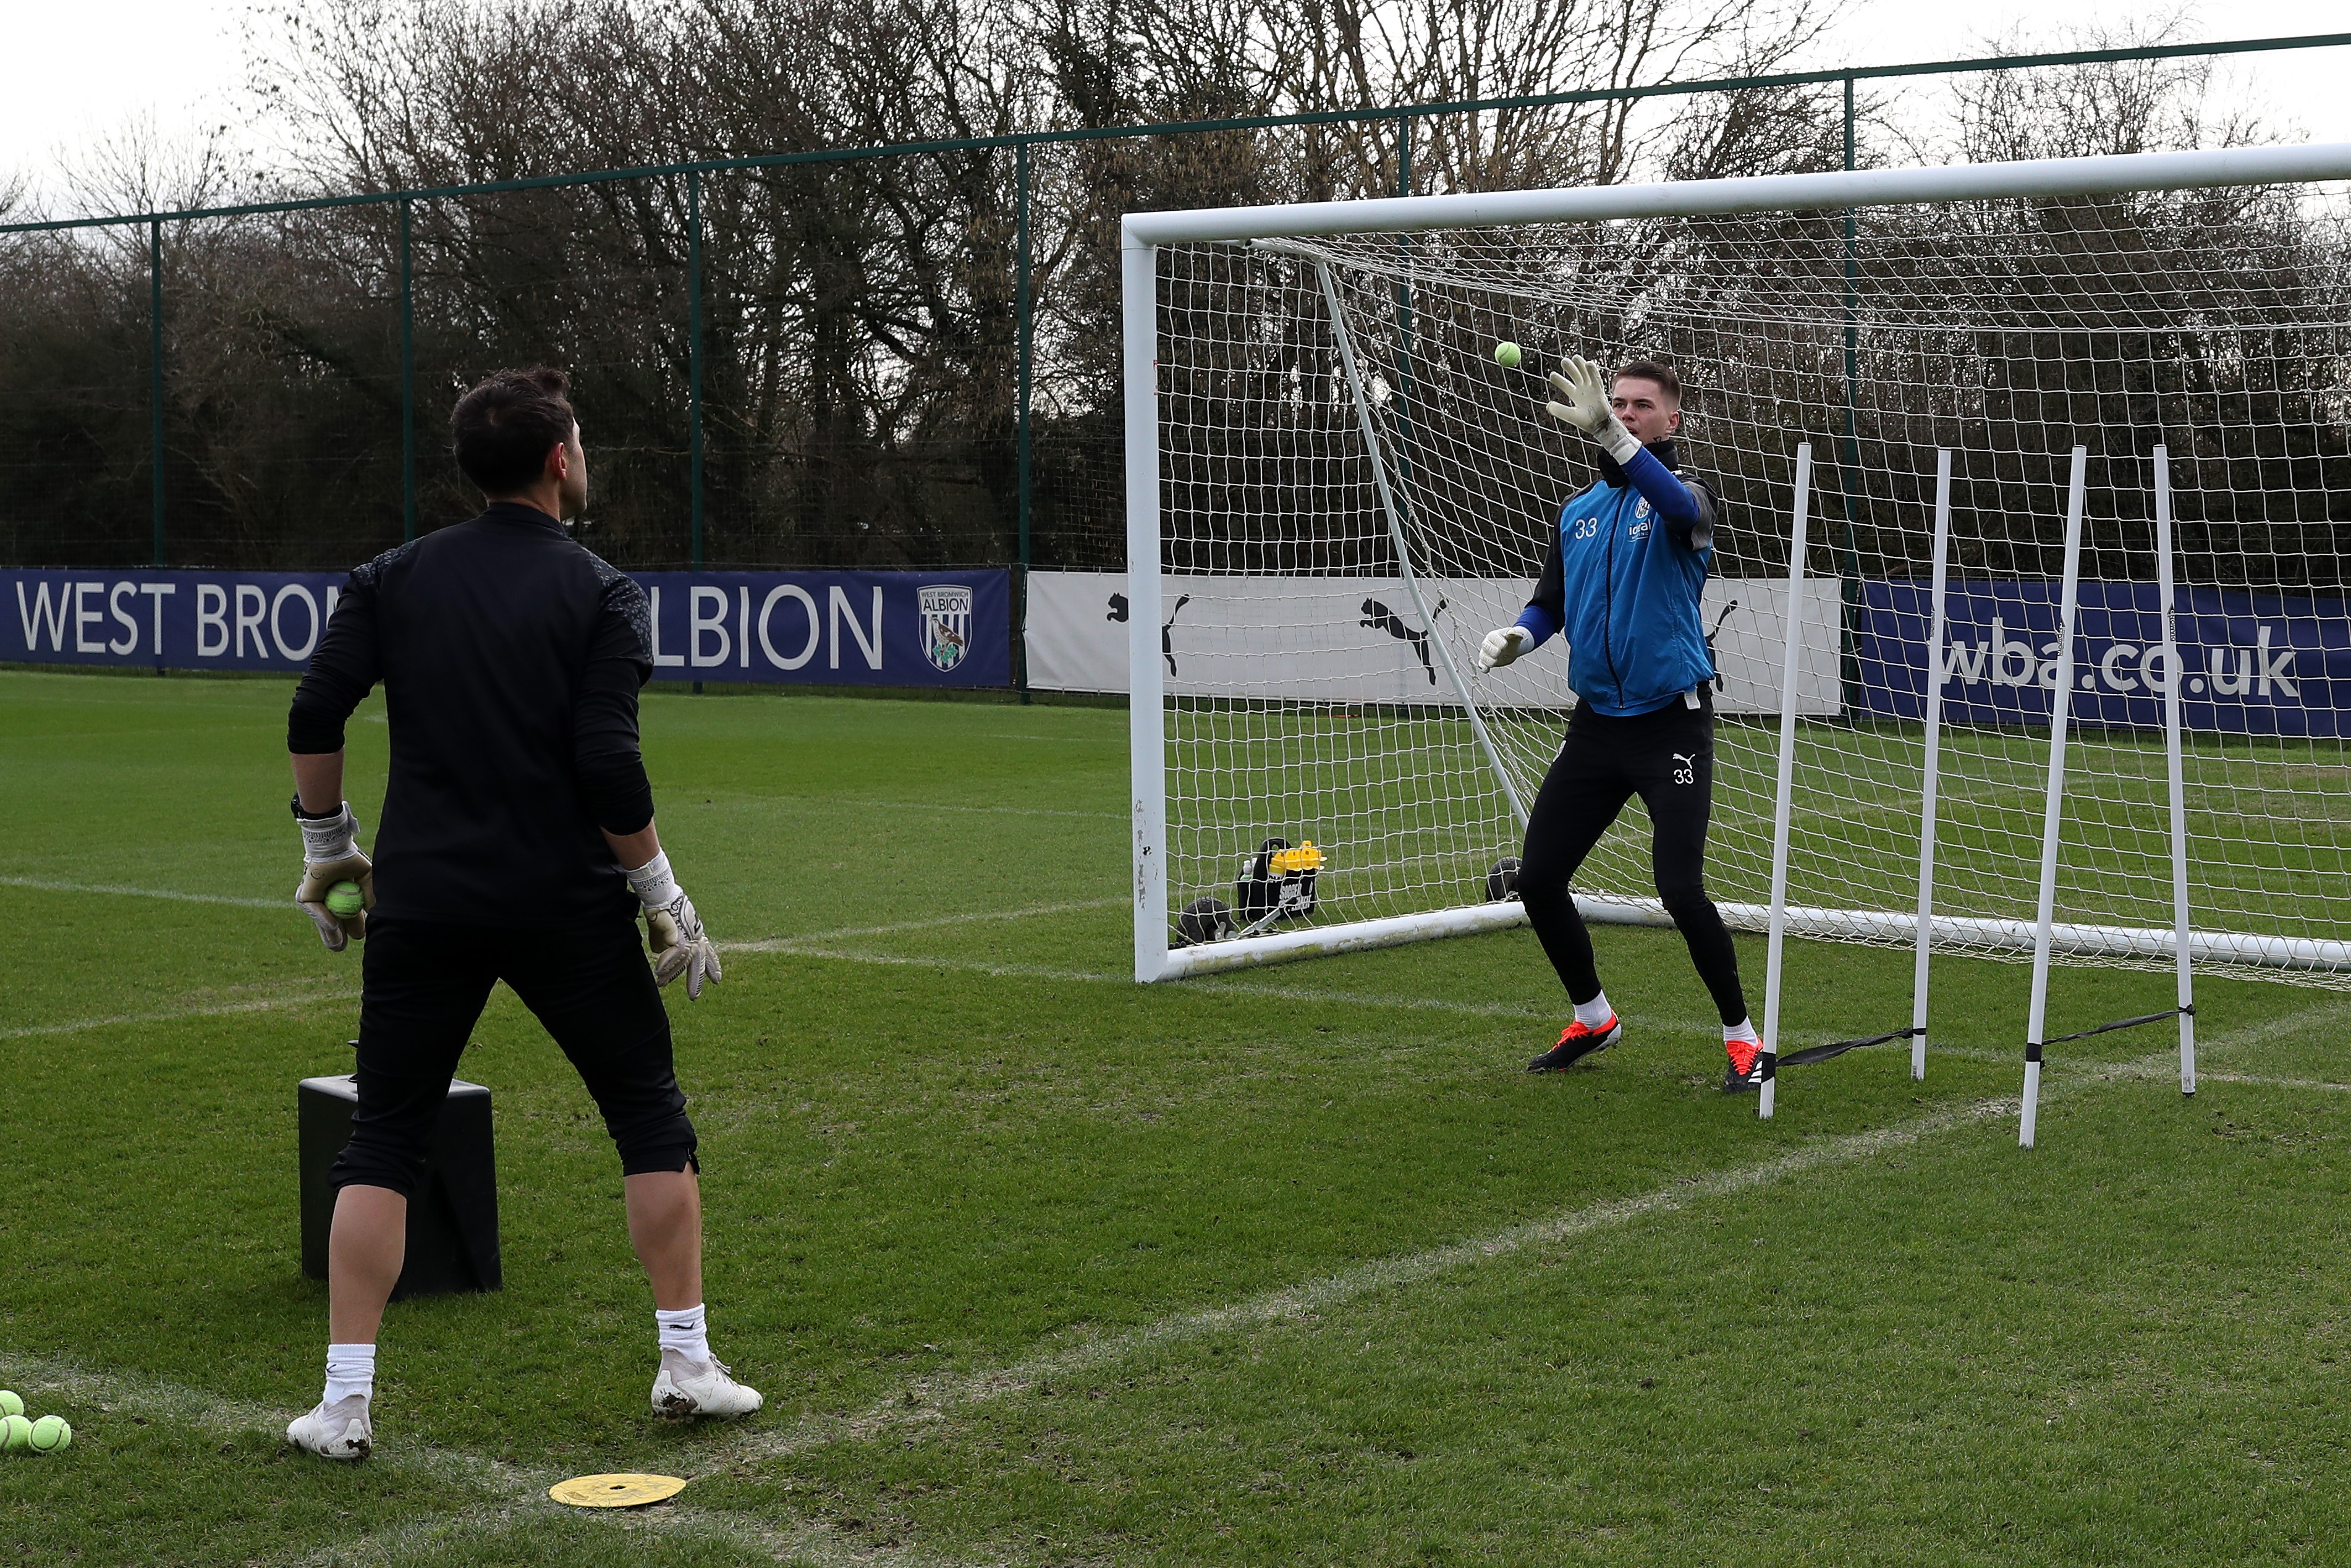 Josh Griffiths working with a tennis ball and goalkeeping coach Marcos Abad